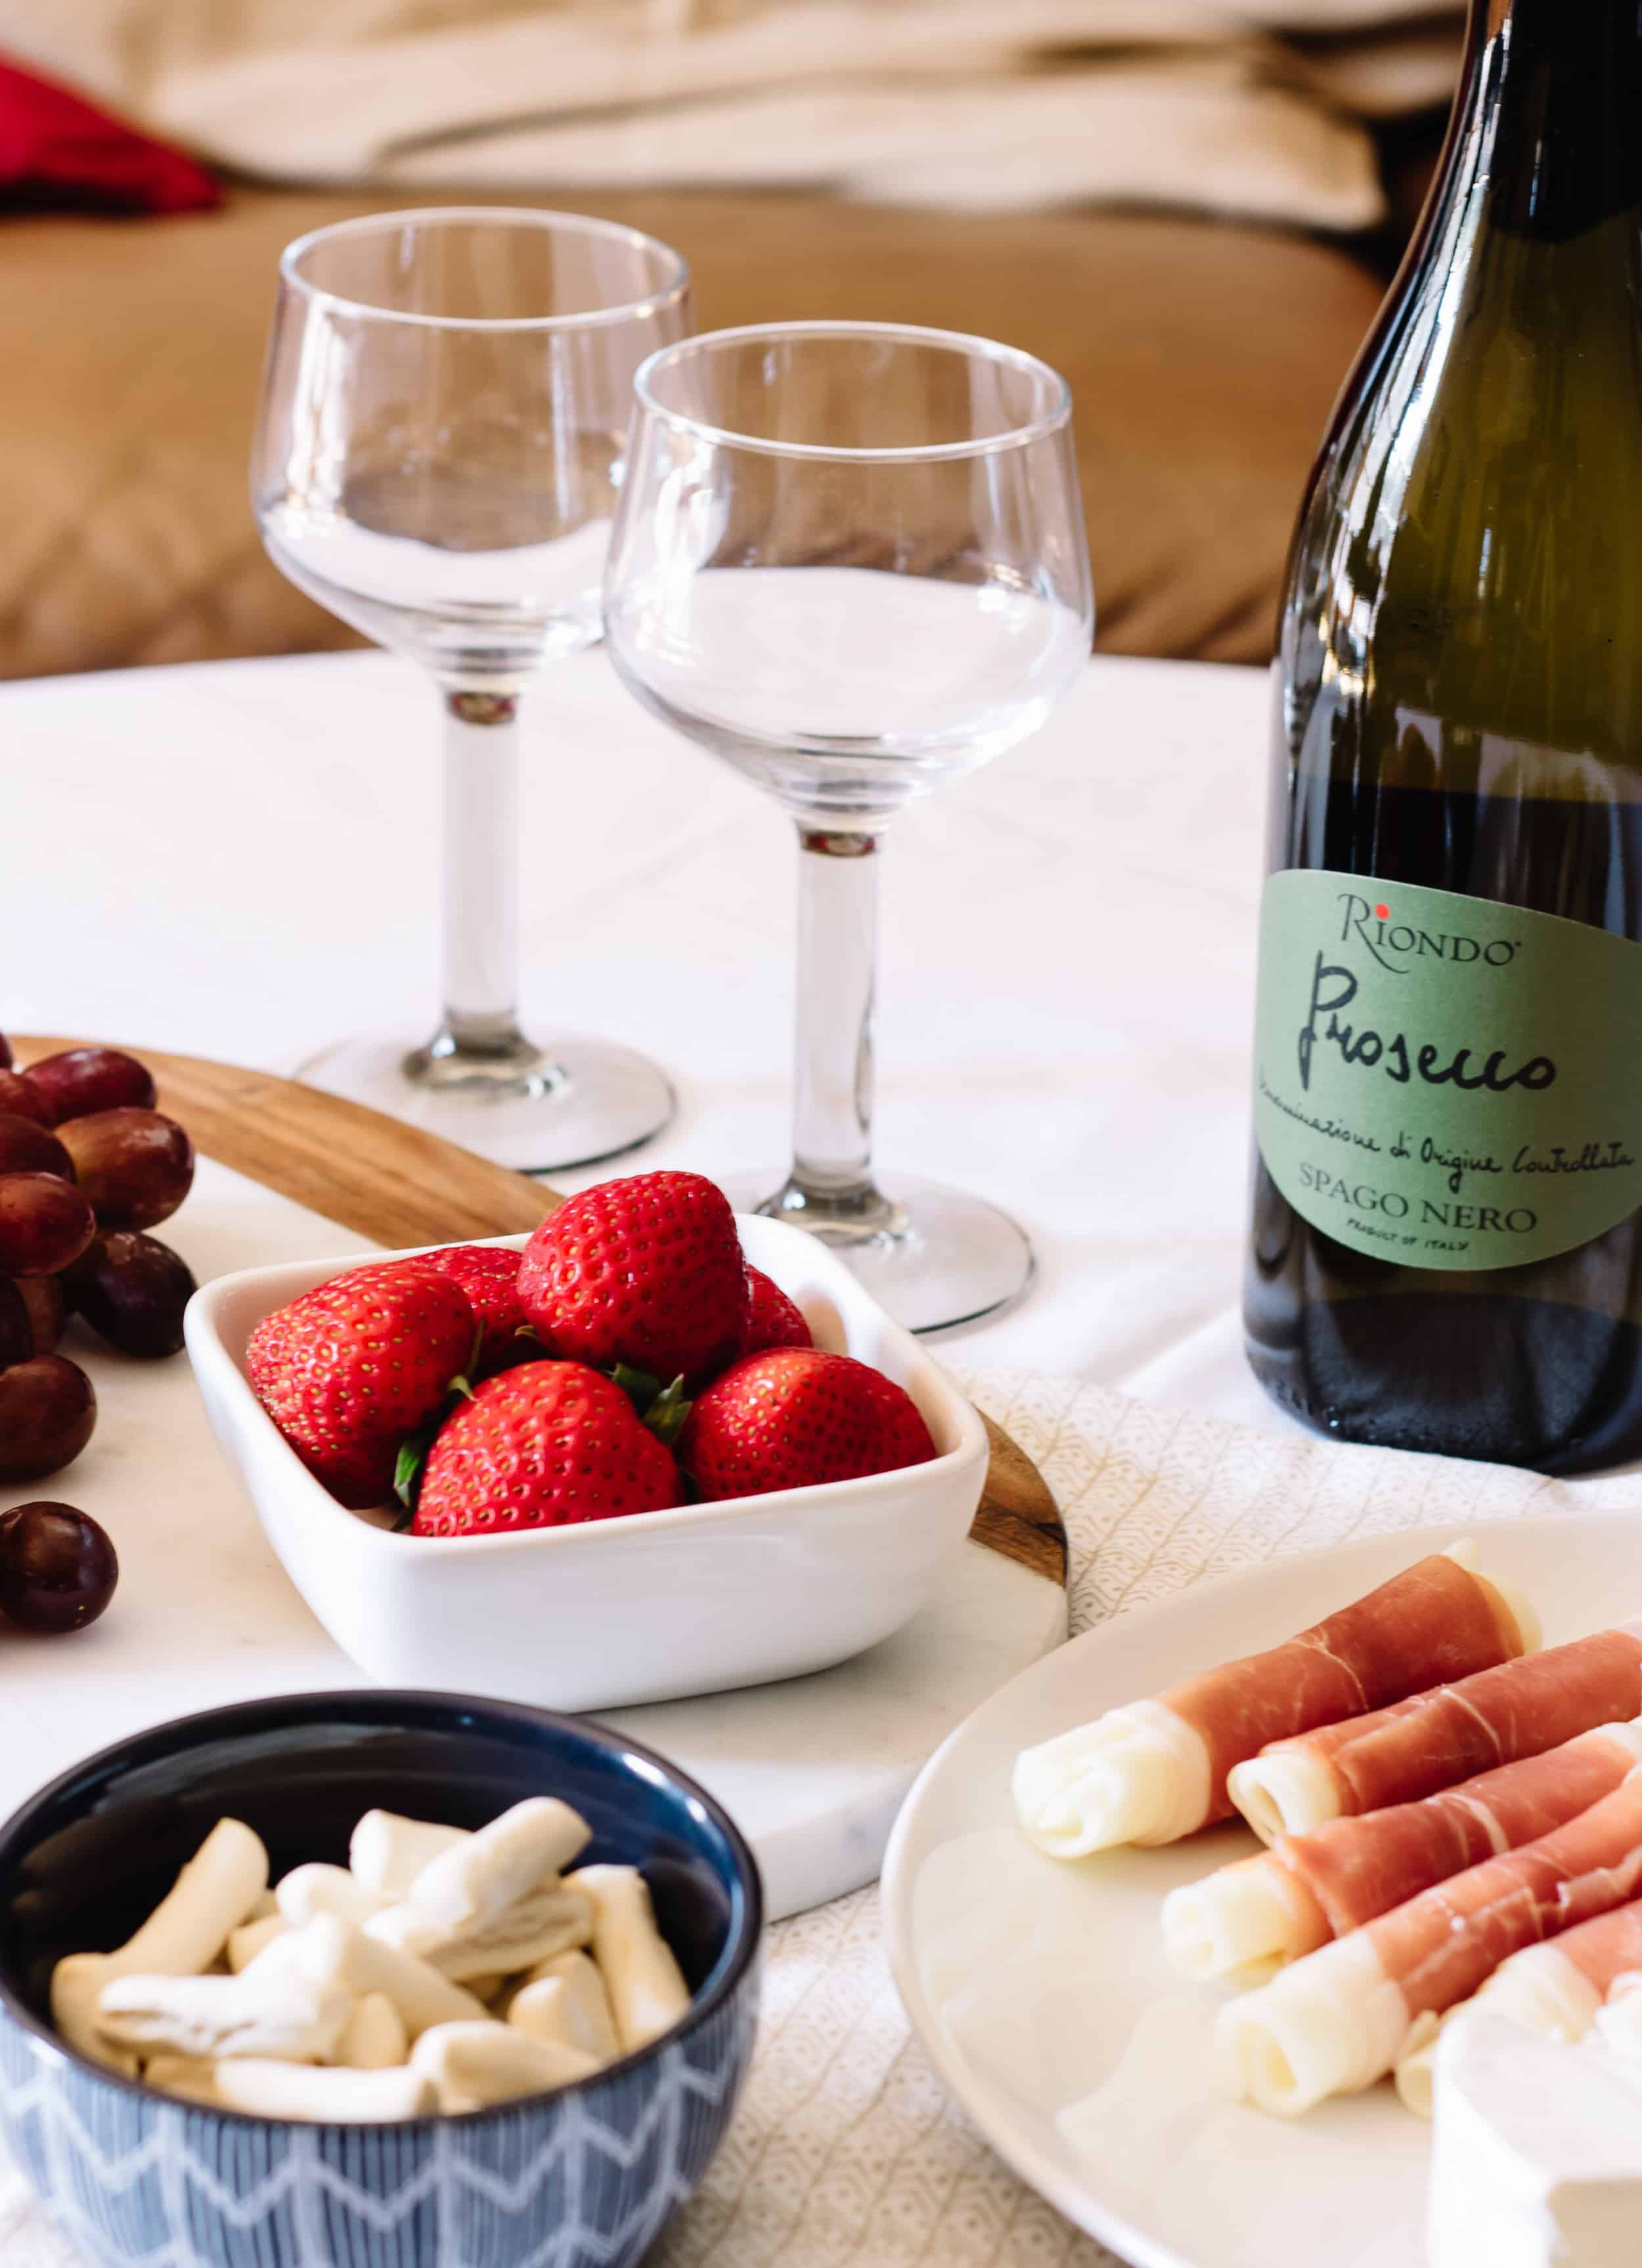 Create your own happy hour at home and enjoy great wine and food alone or with friends. Here are 4 Simple Tips for Hosting Happy Hour at Home. // #RiondoProsecco #ItalianForsummer #ad